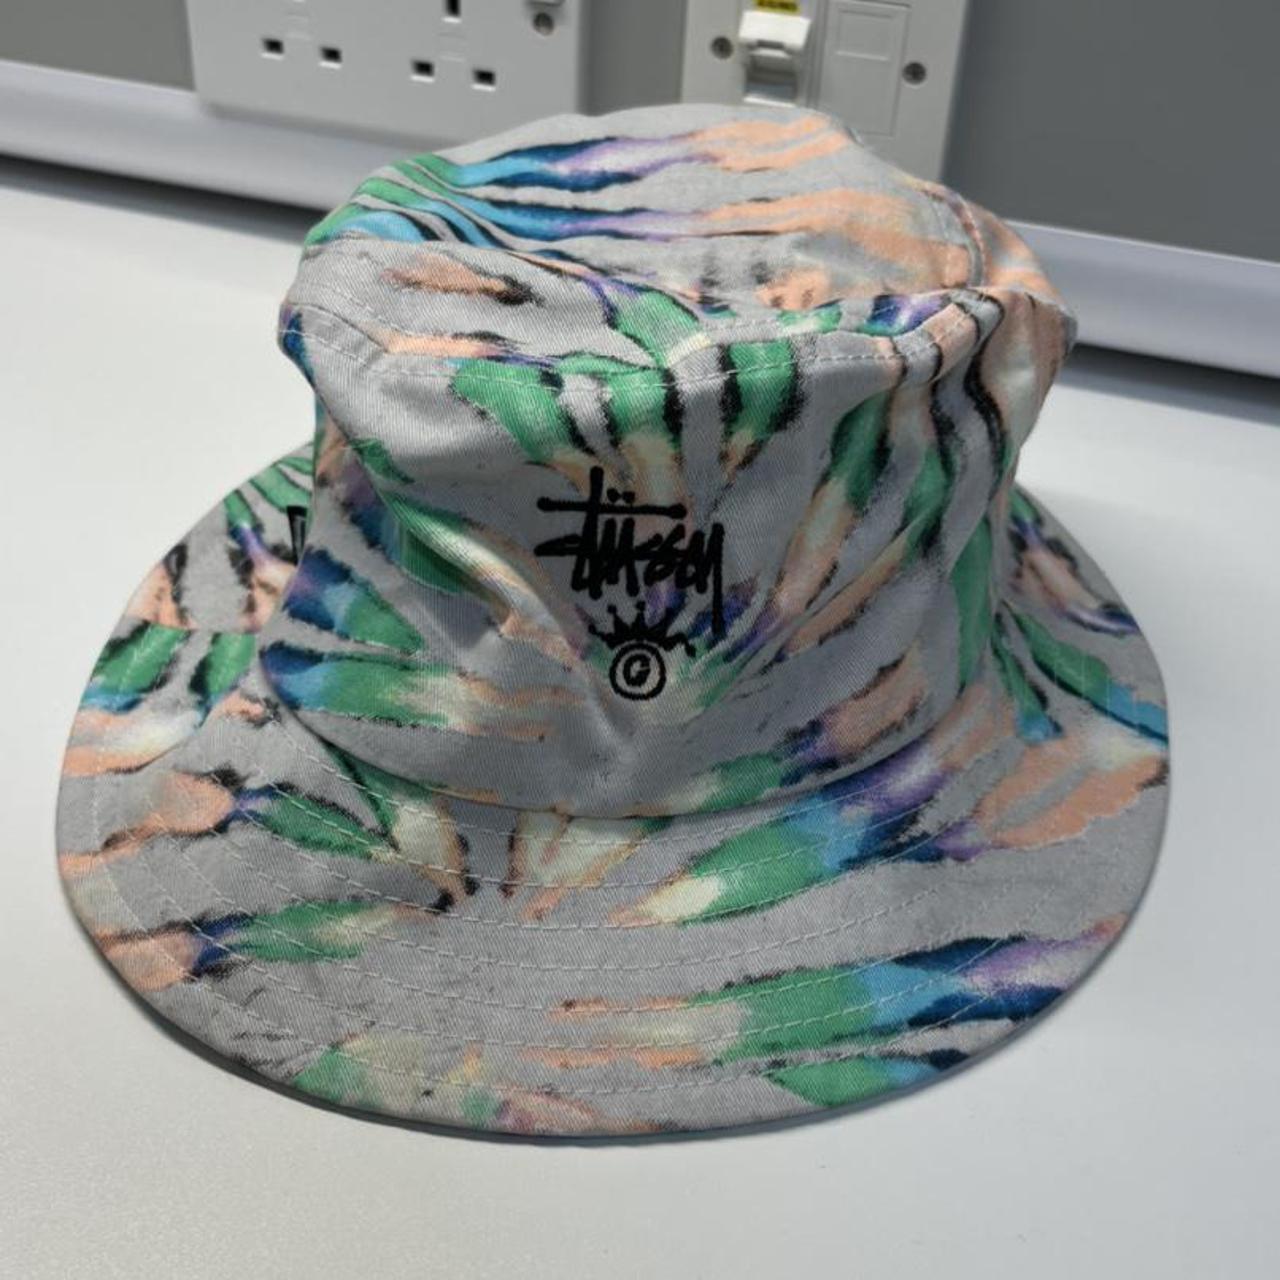 Product Image 1 - Stussy Bucket Hat in "Rainbow"
Condition: